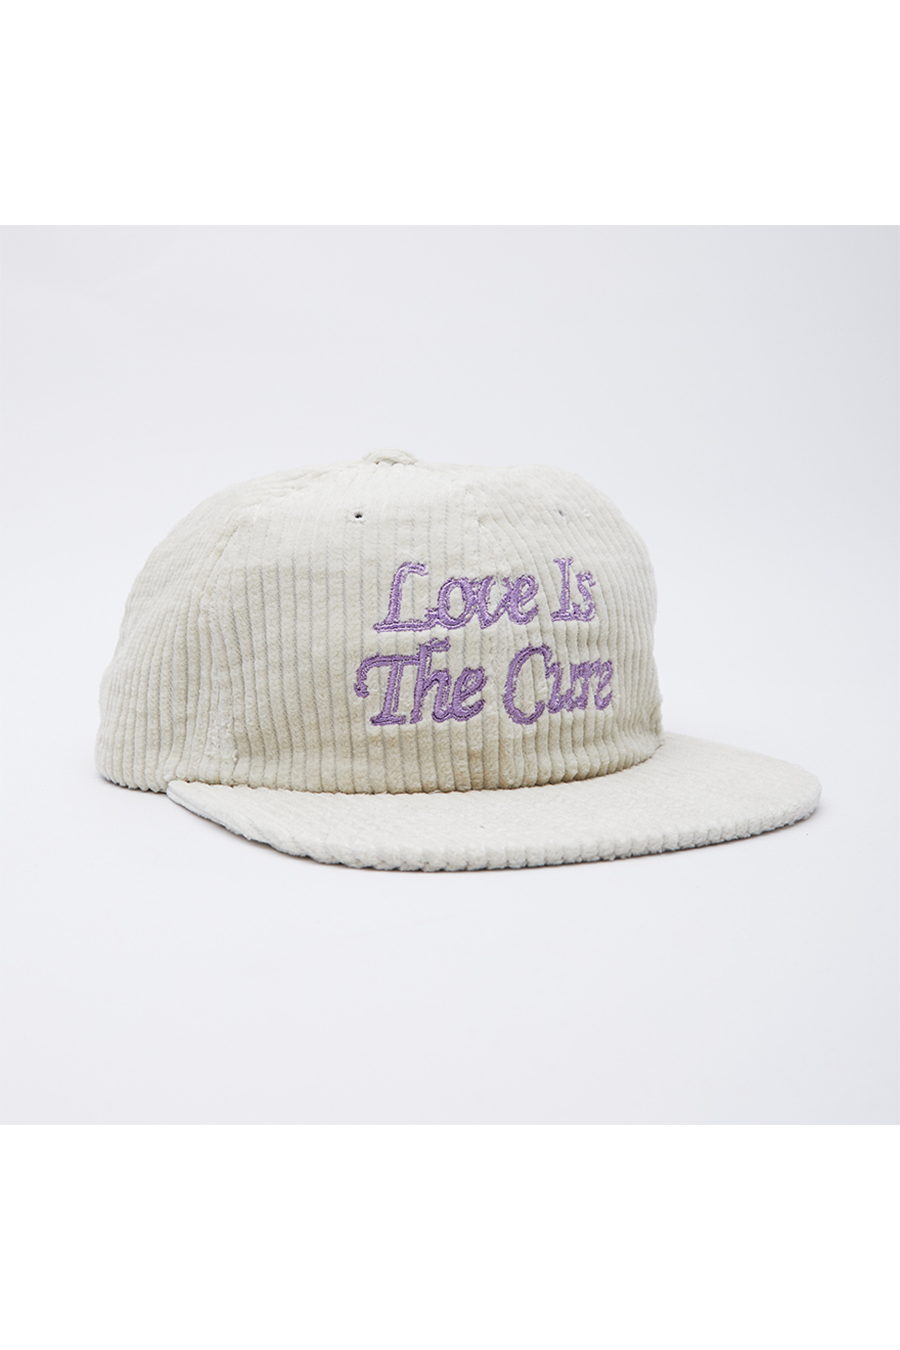 The Cure 6 Panel Strapback | Sago - Main Image Number 1 of 3